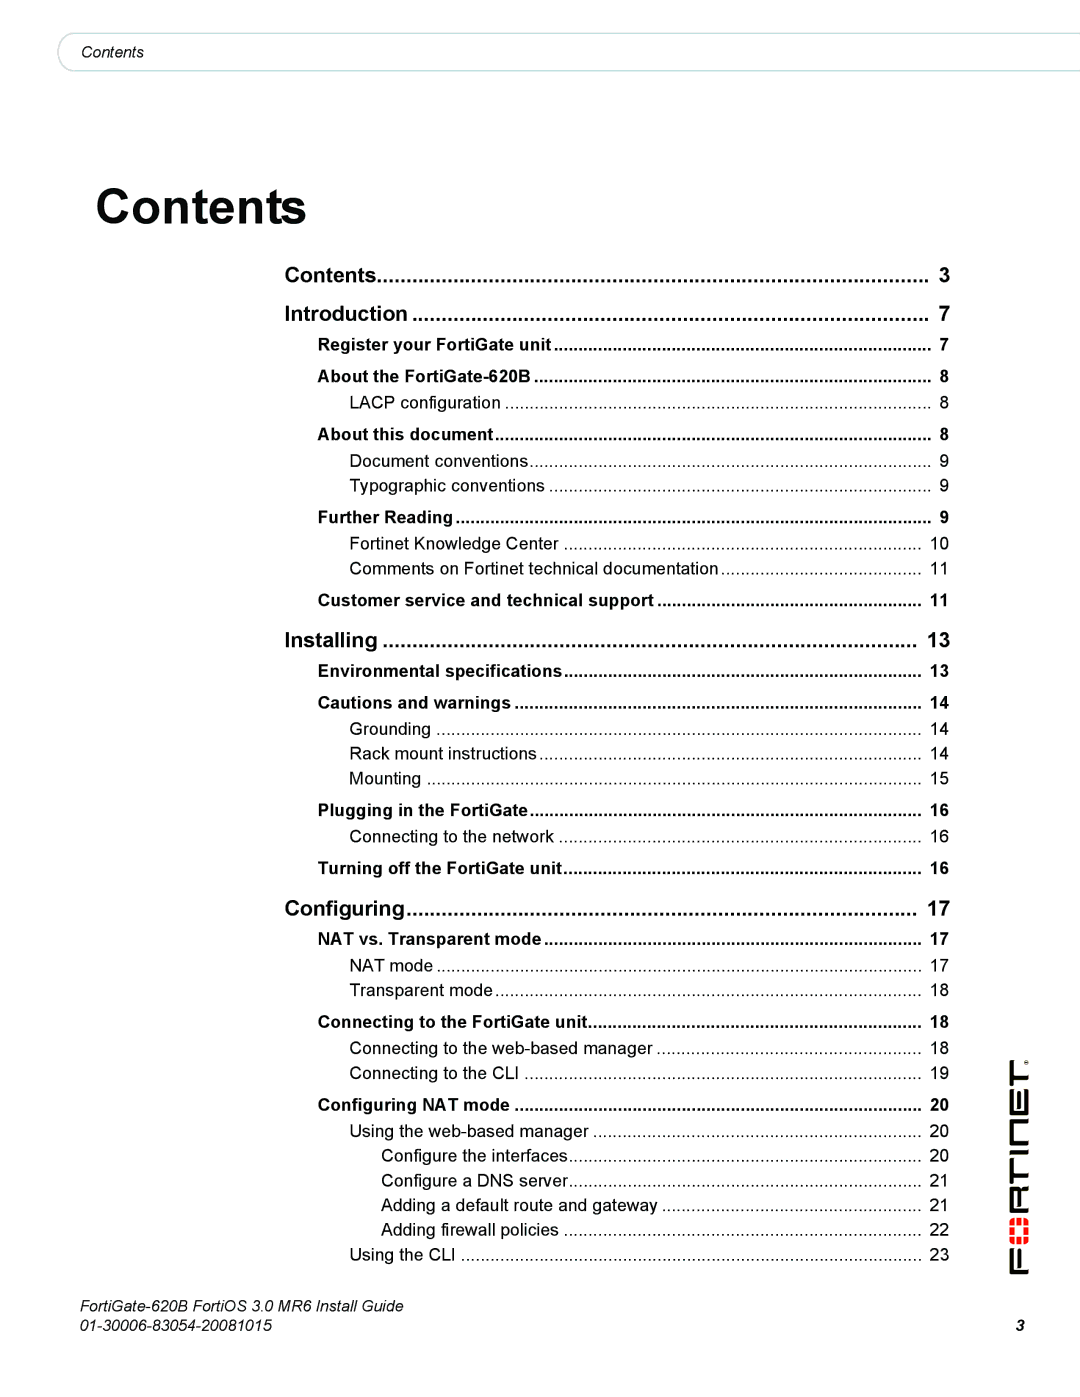 Fortinet 620B manual Contents 